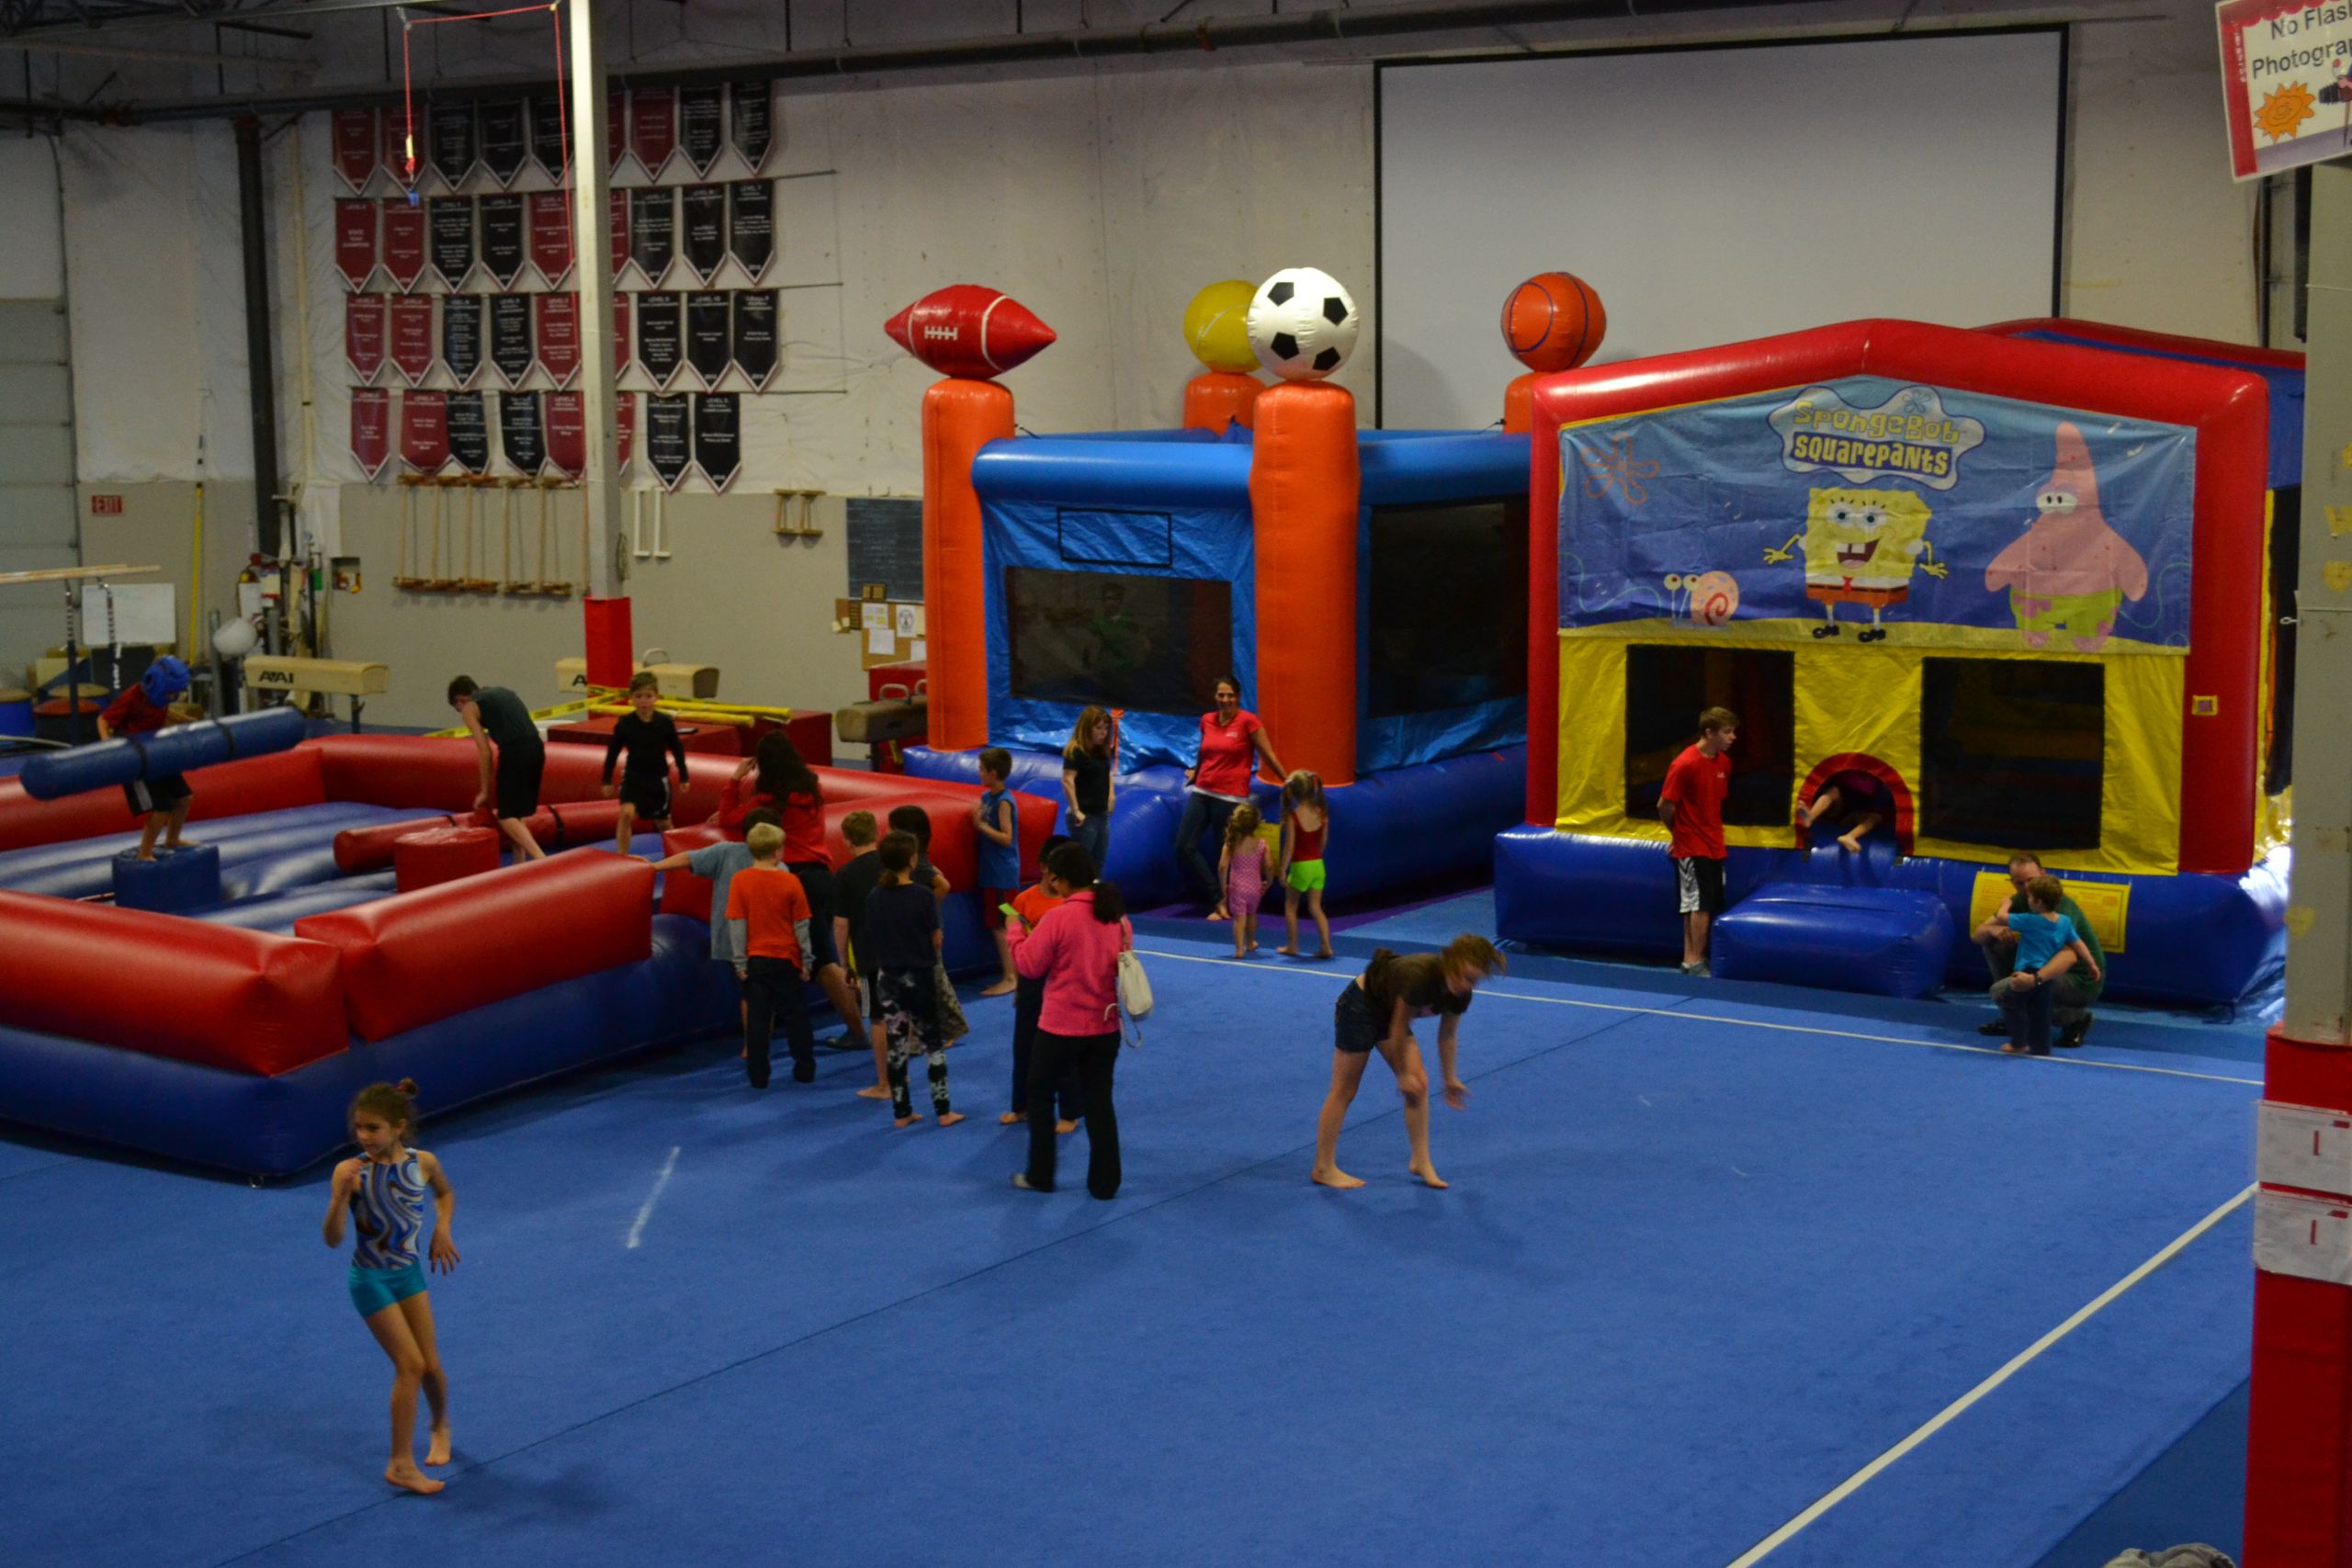 My Gym Birthday Party
 35 year old birthday parties are the coolest